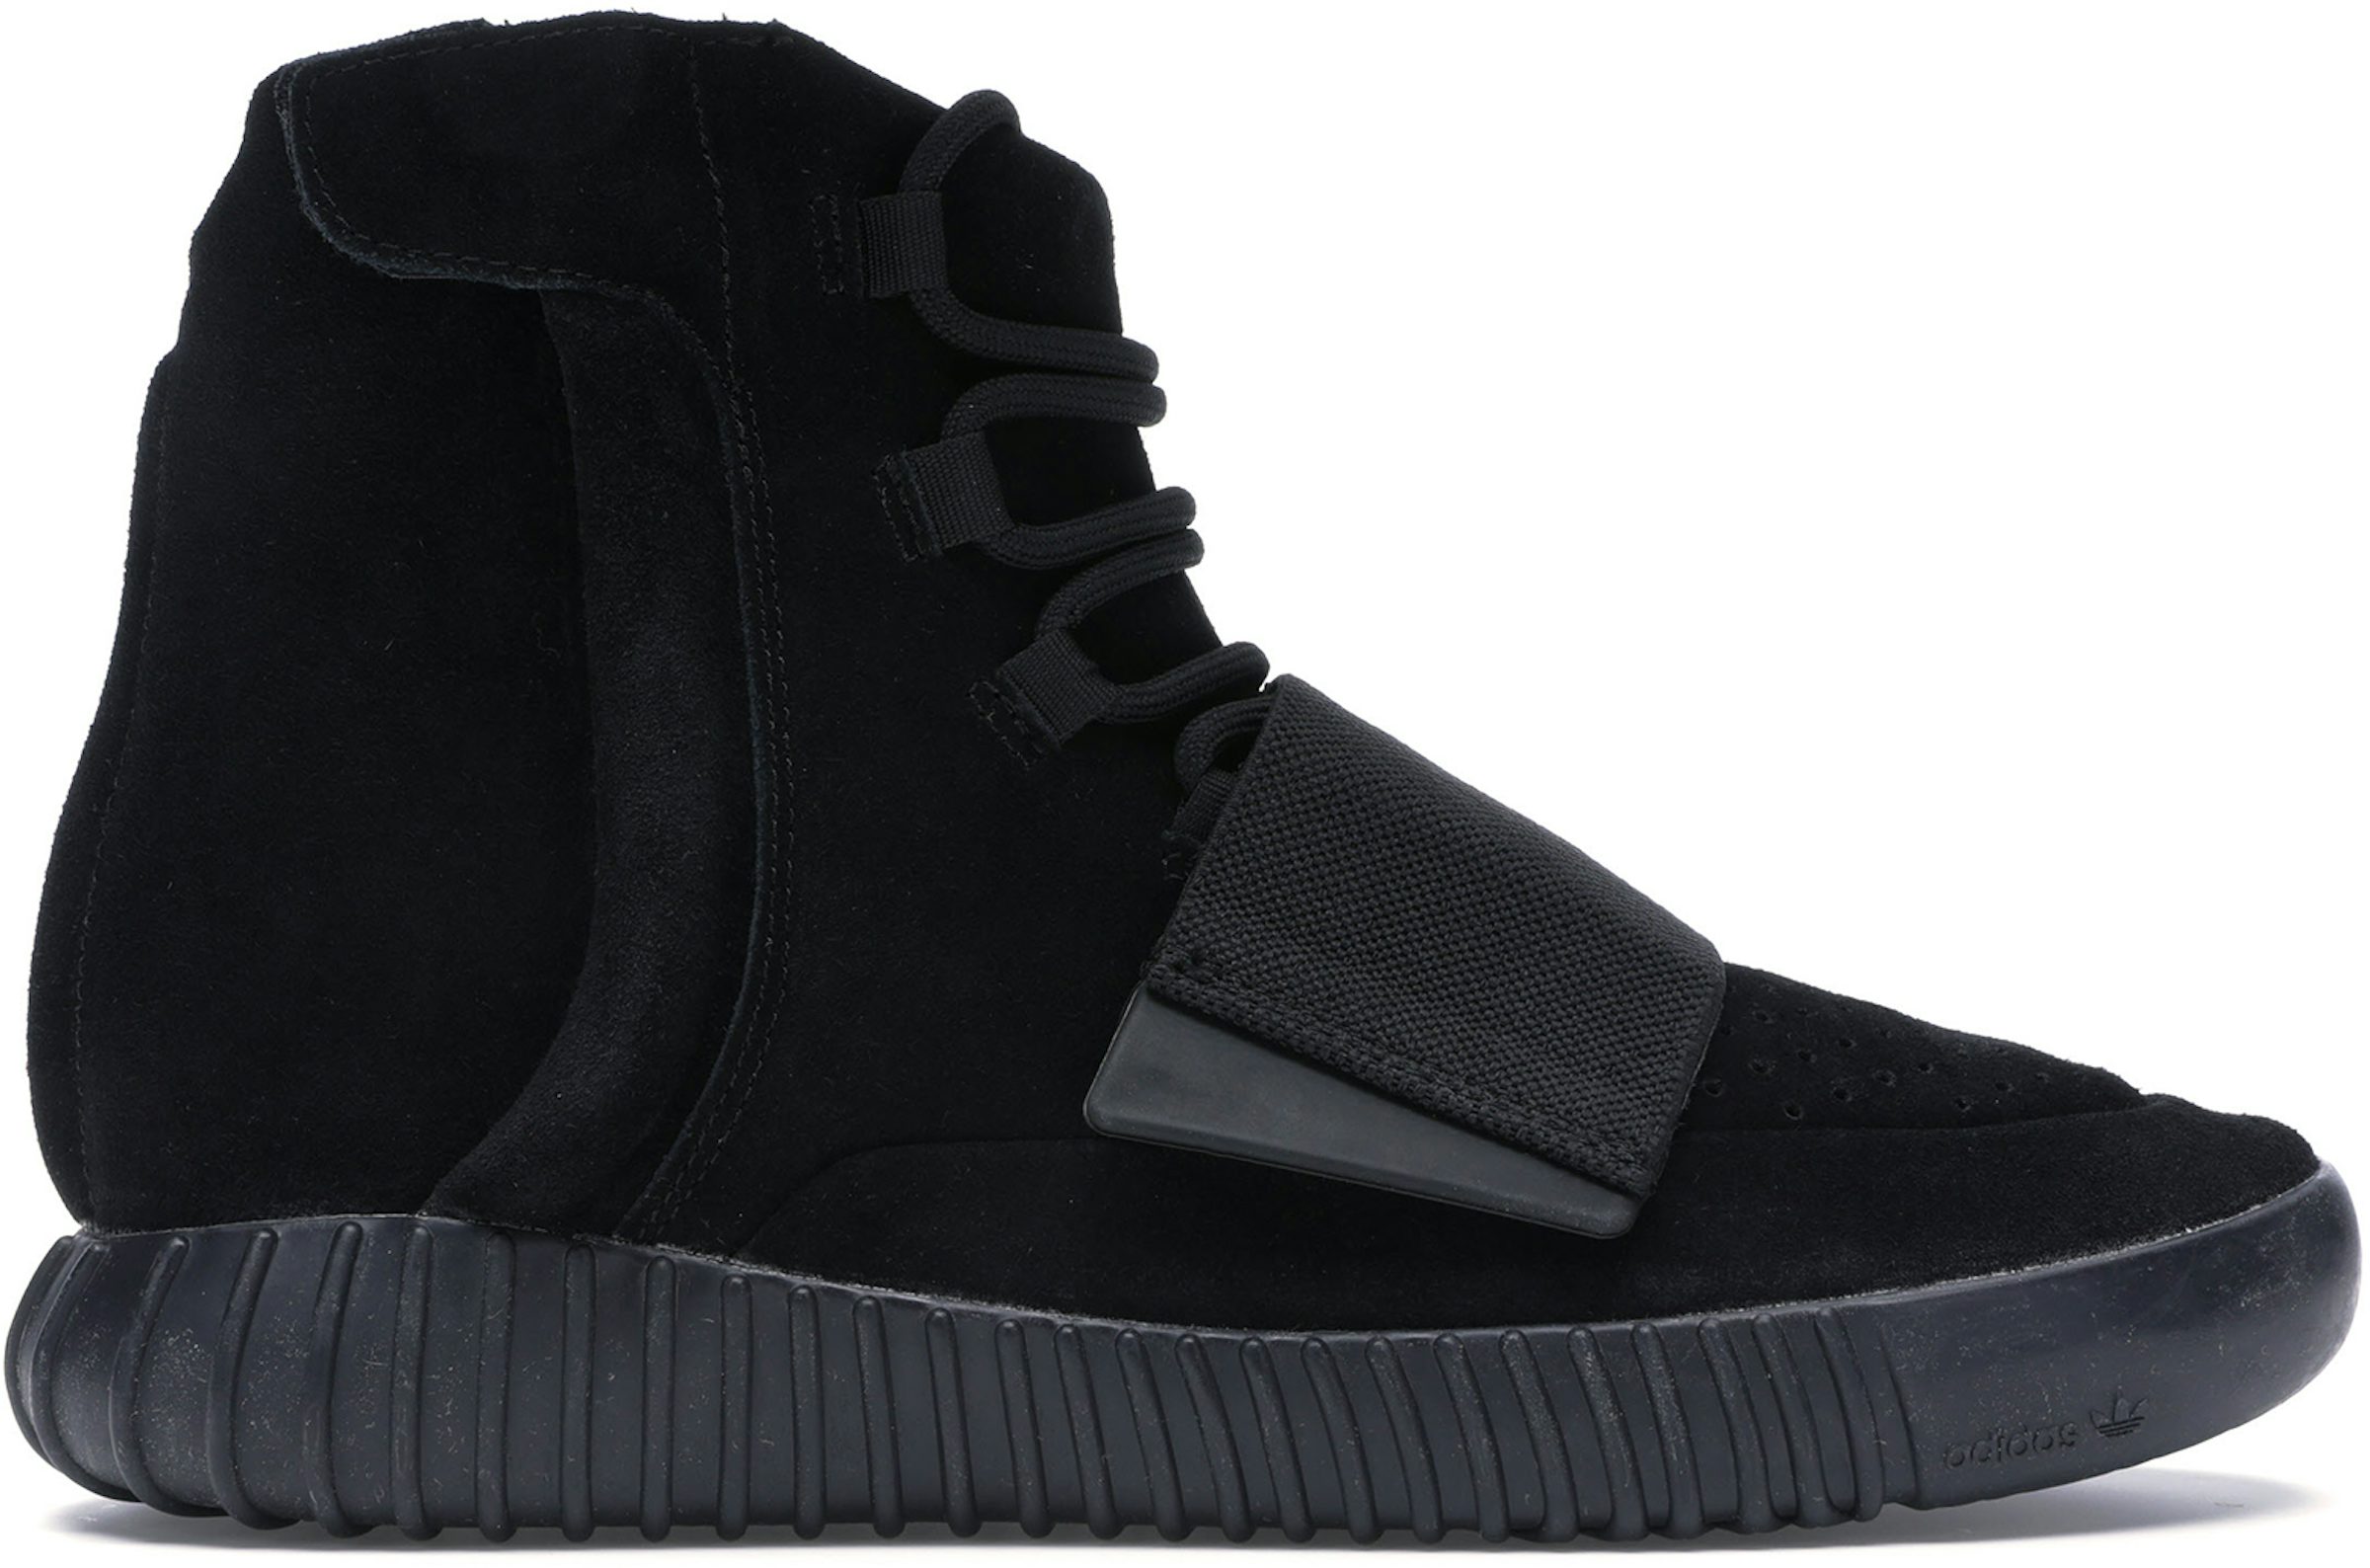 yeezy most expensive shoes